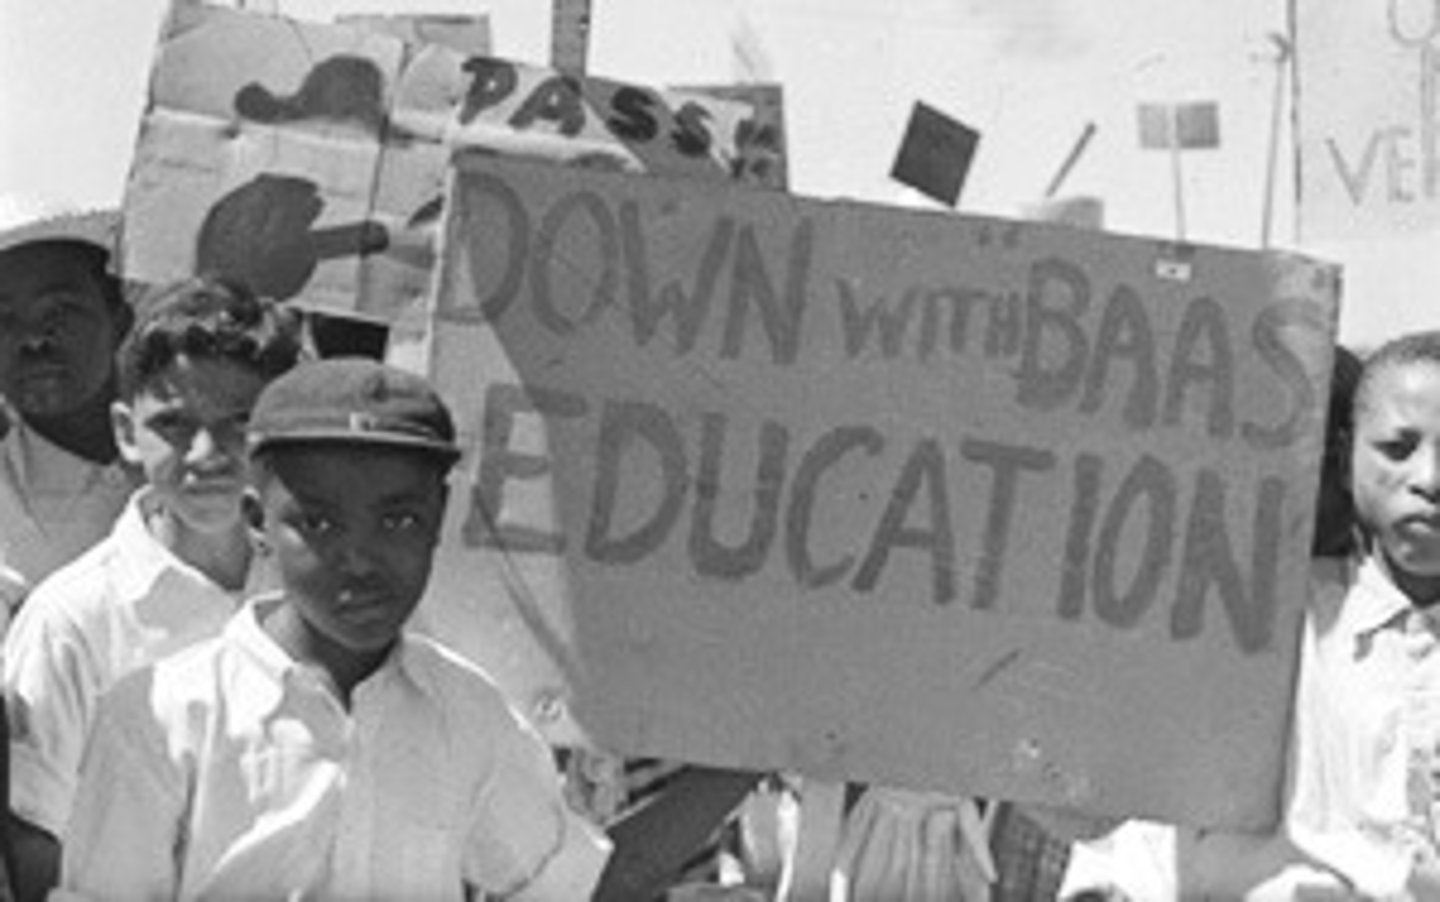 <p>-Schools were segregated<br>-Non-white schools had fewer resources than white schools and were in worse conditions<br>-Students were taught about tribal identity and culture<br>-poor education was justified by the mentality that "non-whites are only meant to be menial workers anyway"</p>